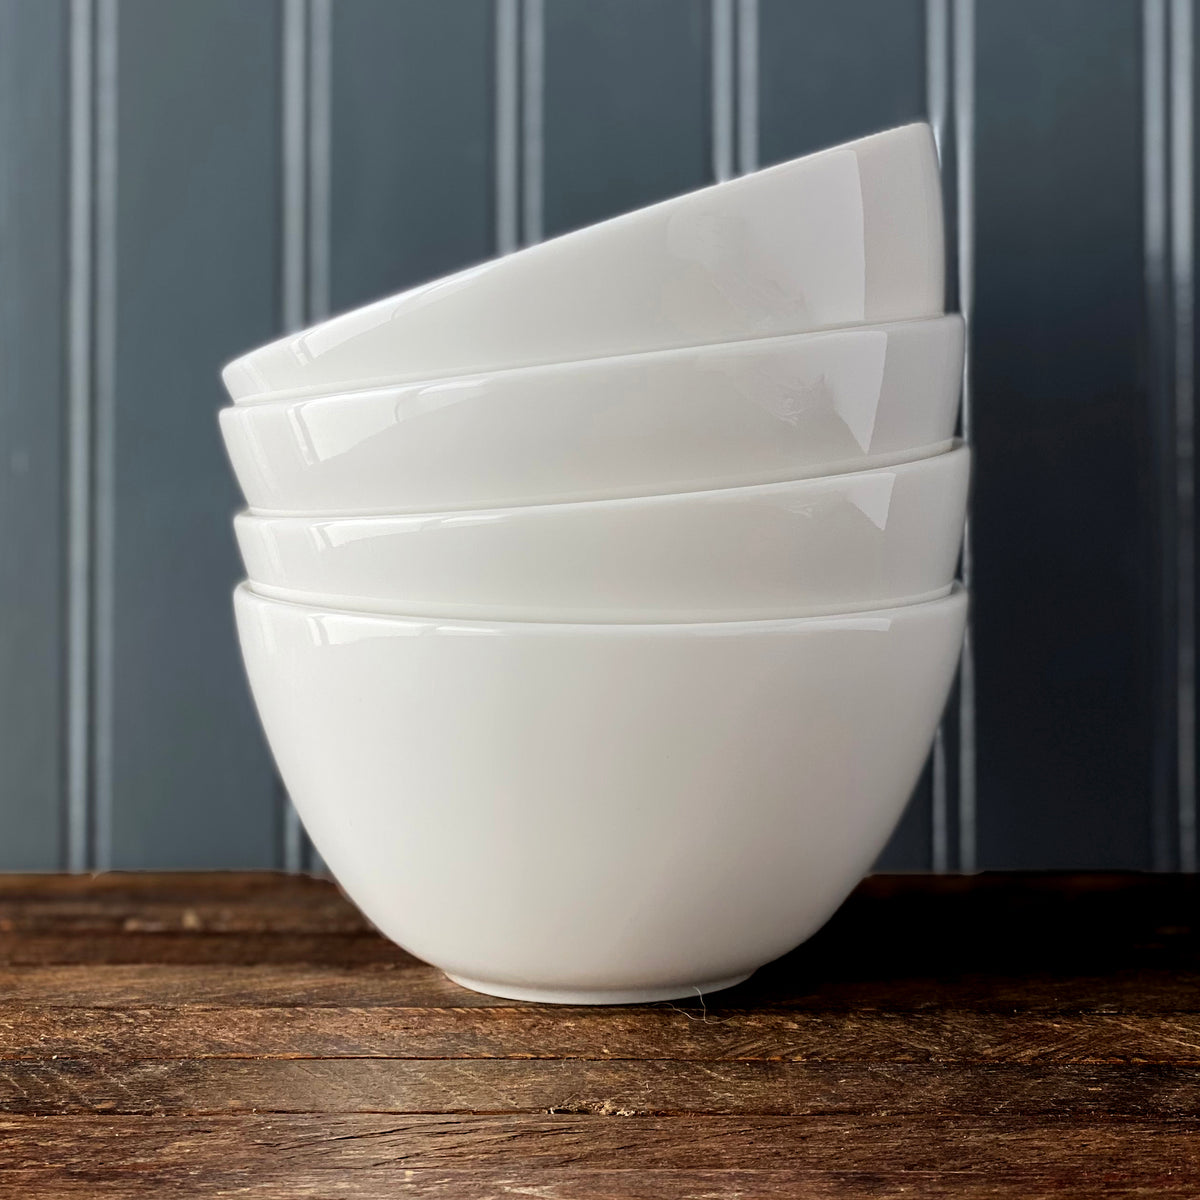 Four sleek, high-fired Grace White Cereal Bowls by Caskata Artisanal Home stacked on a rustic wooden surface with a vertical striped wall background.